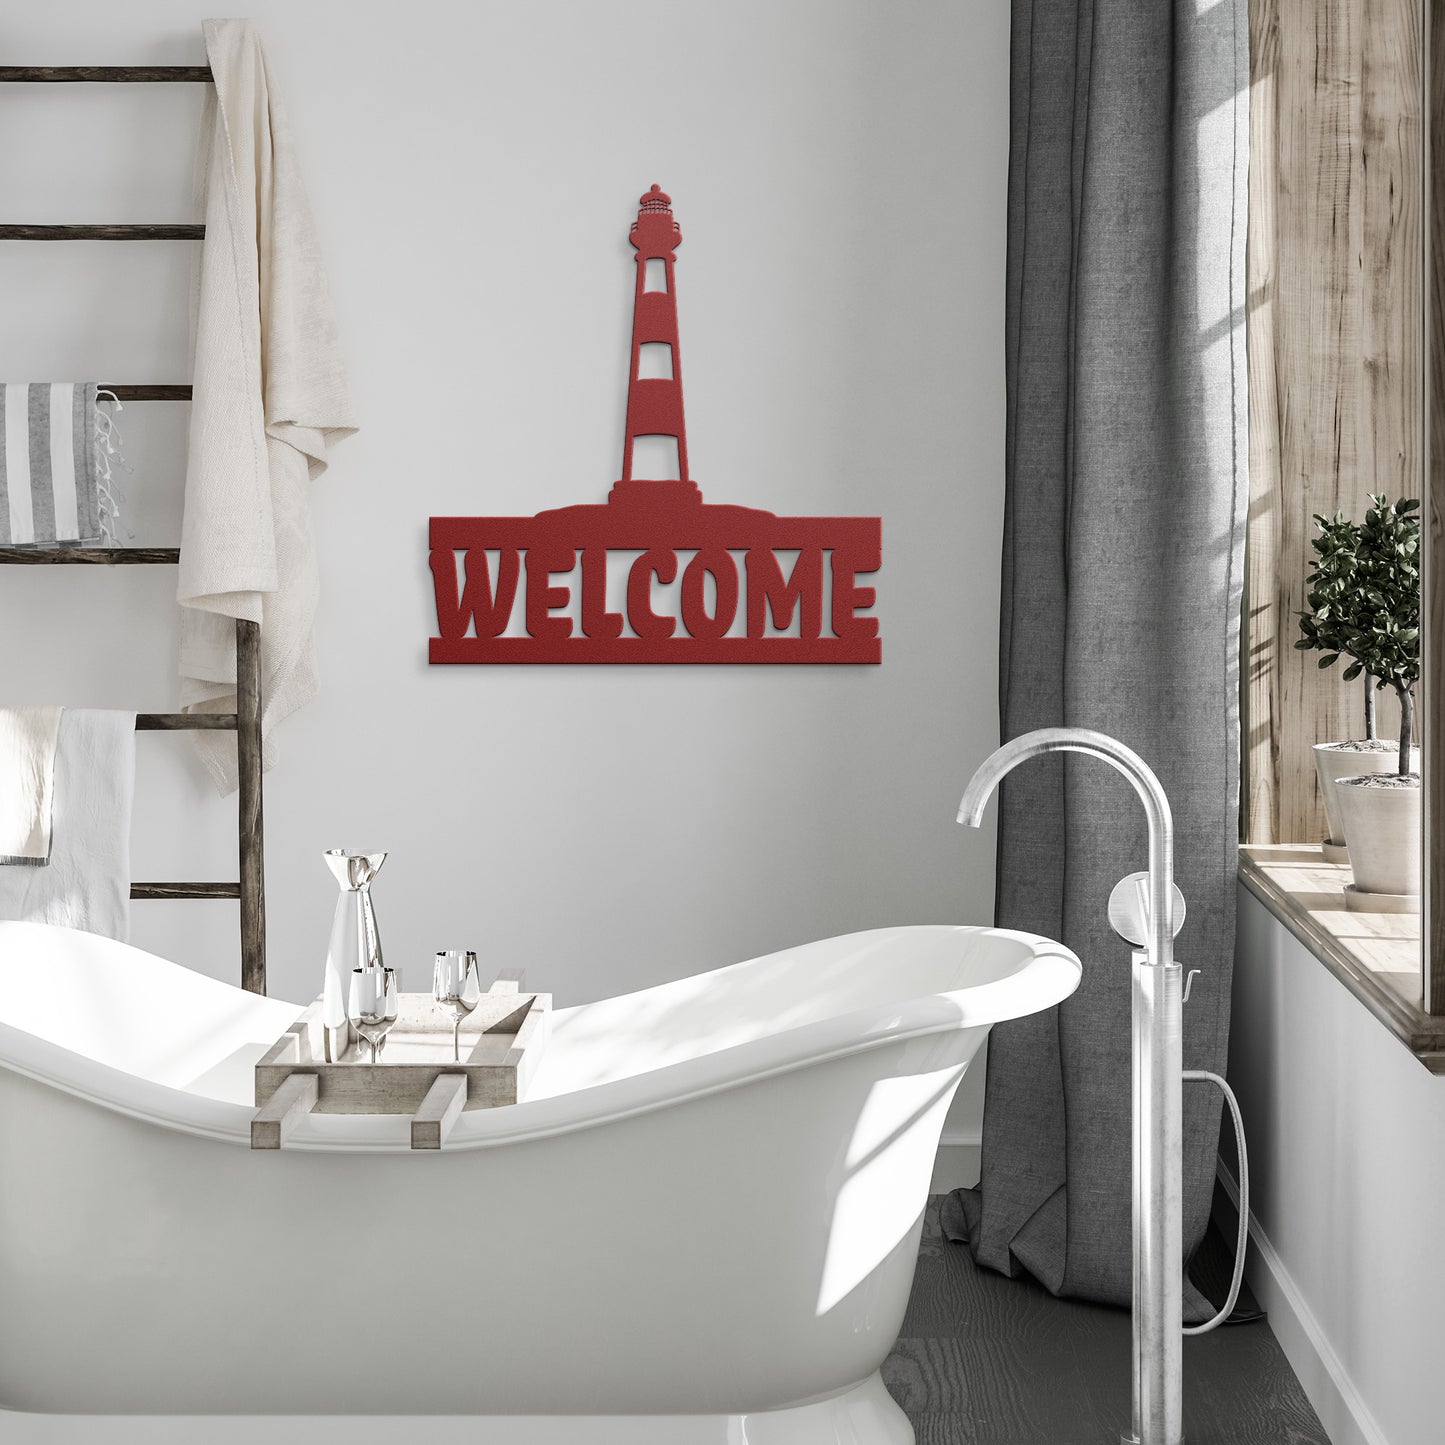 Metal Welcome Sign- Lighthouse 3 Welcome Sign-Indoor/Outdoor Metal Sign, Coastal Sign, Beach Sign, Home Decor